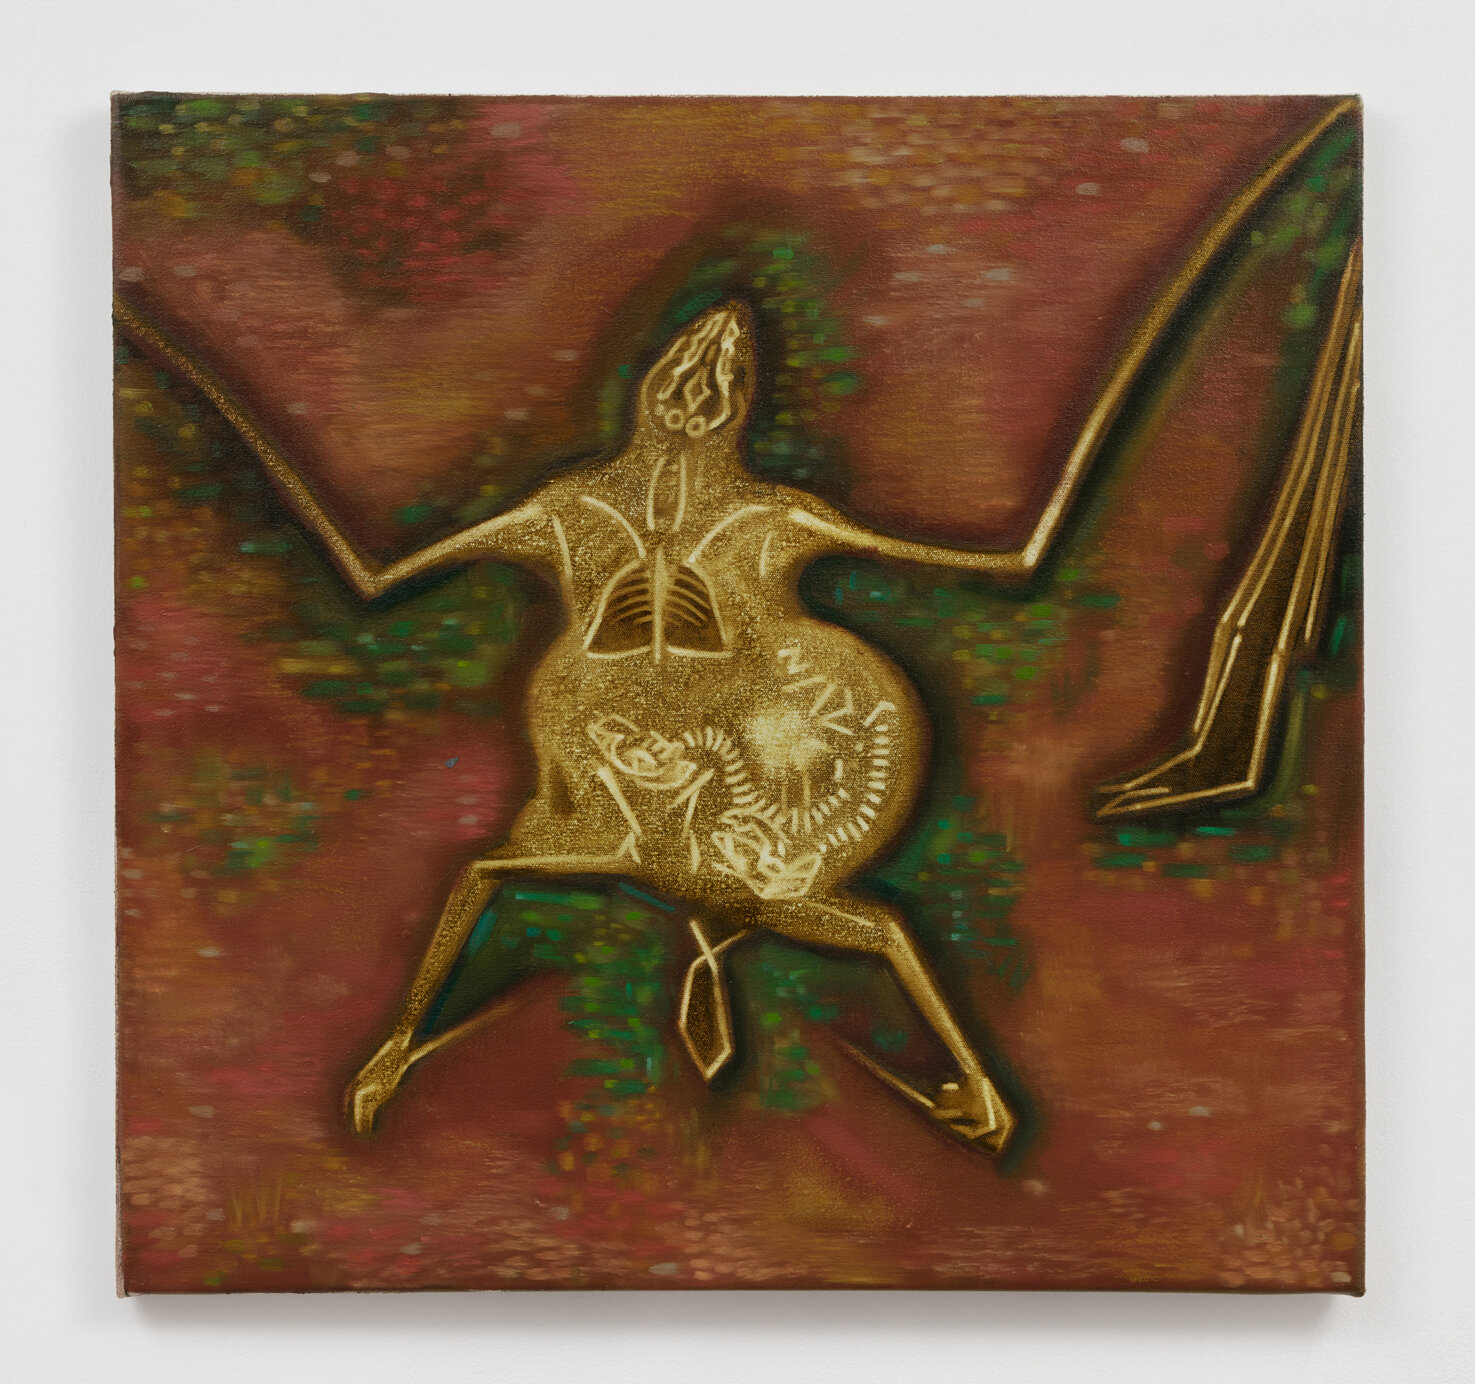   Amber Bat,  2020. Oil on canvas. 27 x 28 inches. 